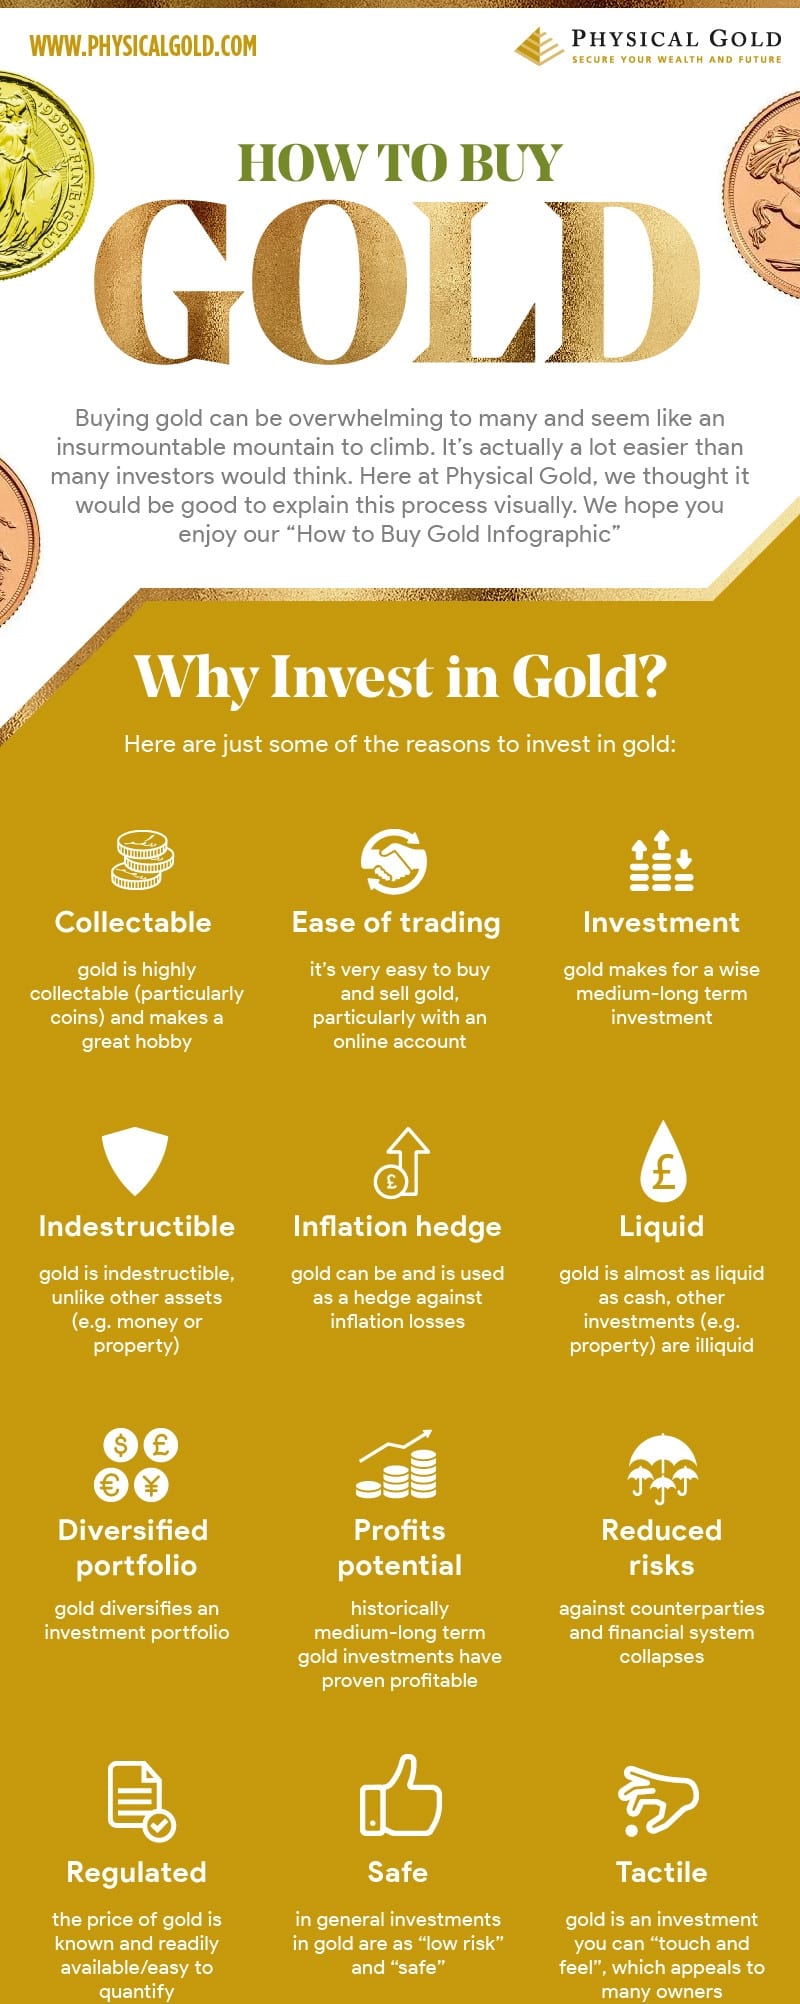 How to Buy Gold Infographic - Top Section